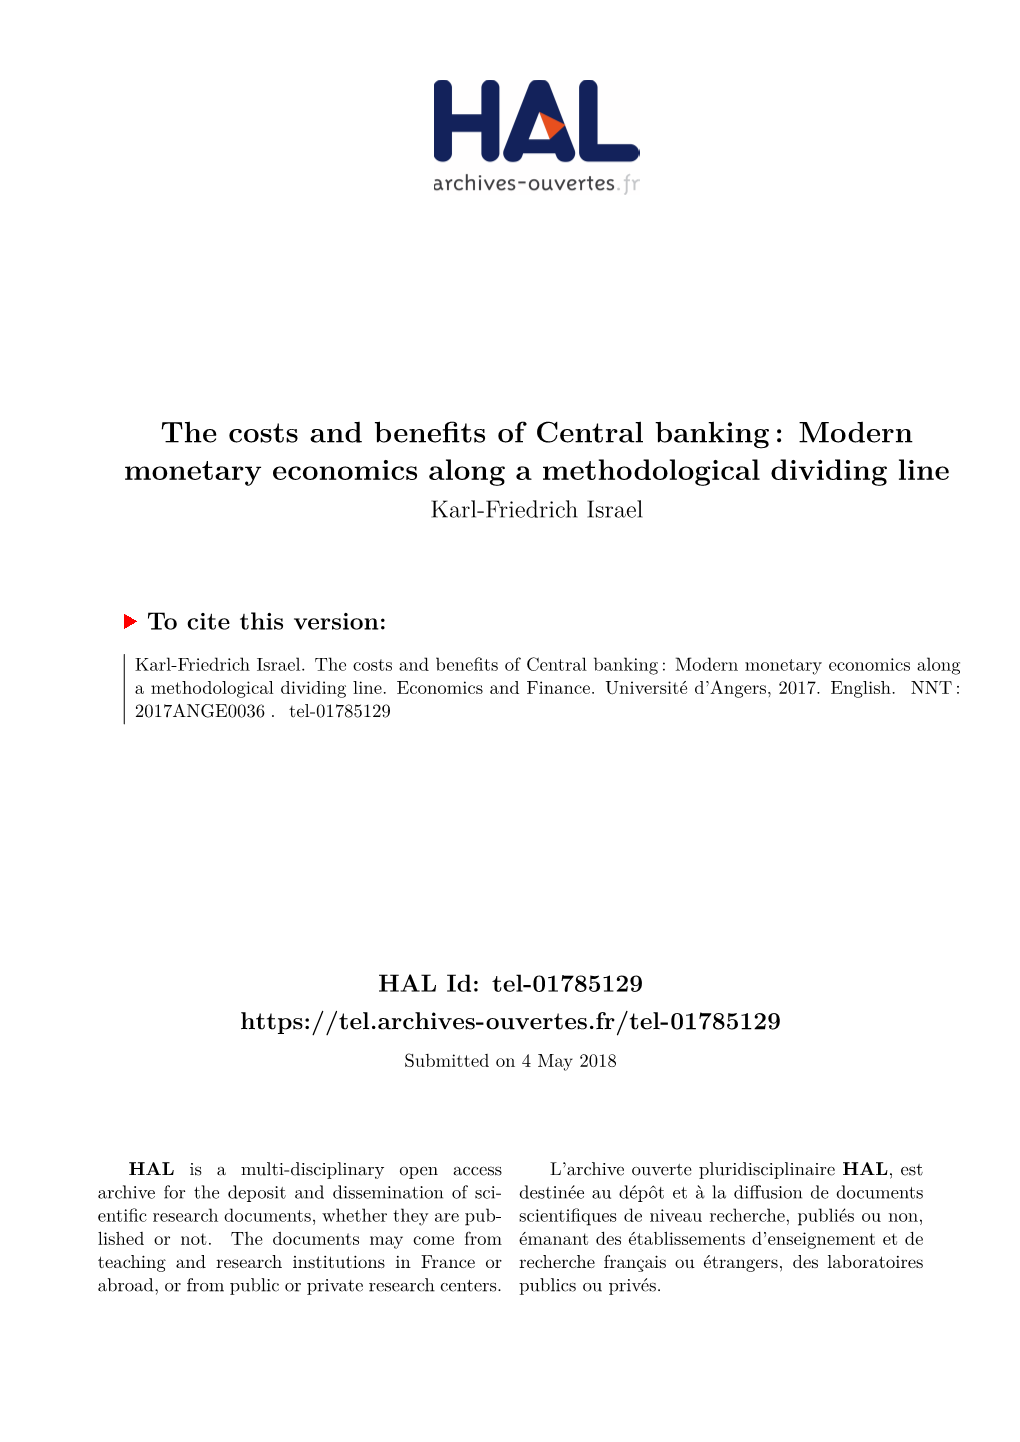 The Costs and Benefits of Central Banking: Modern Monetary